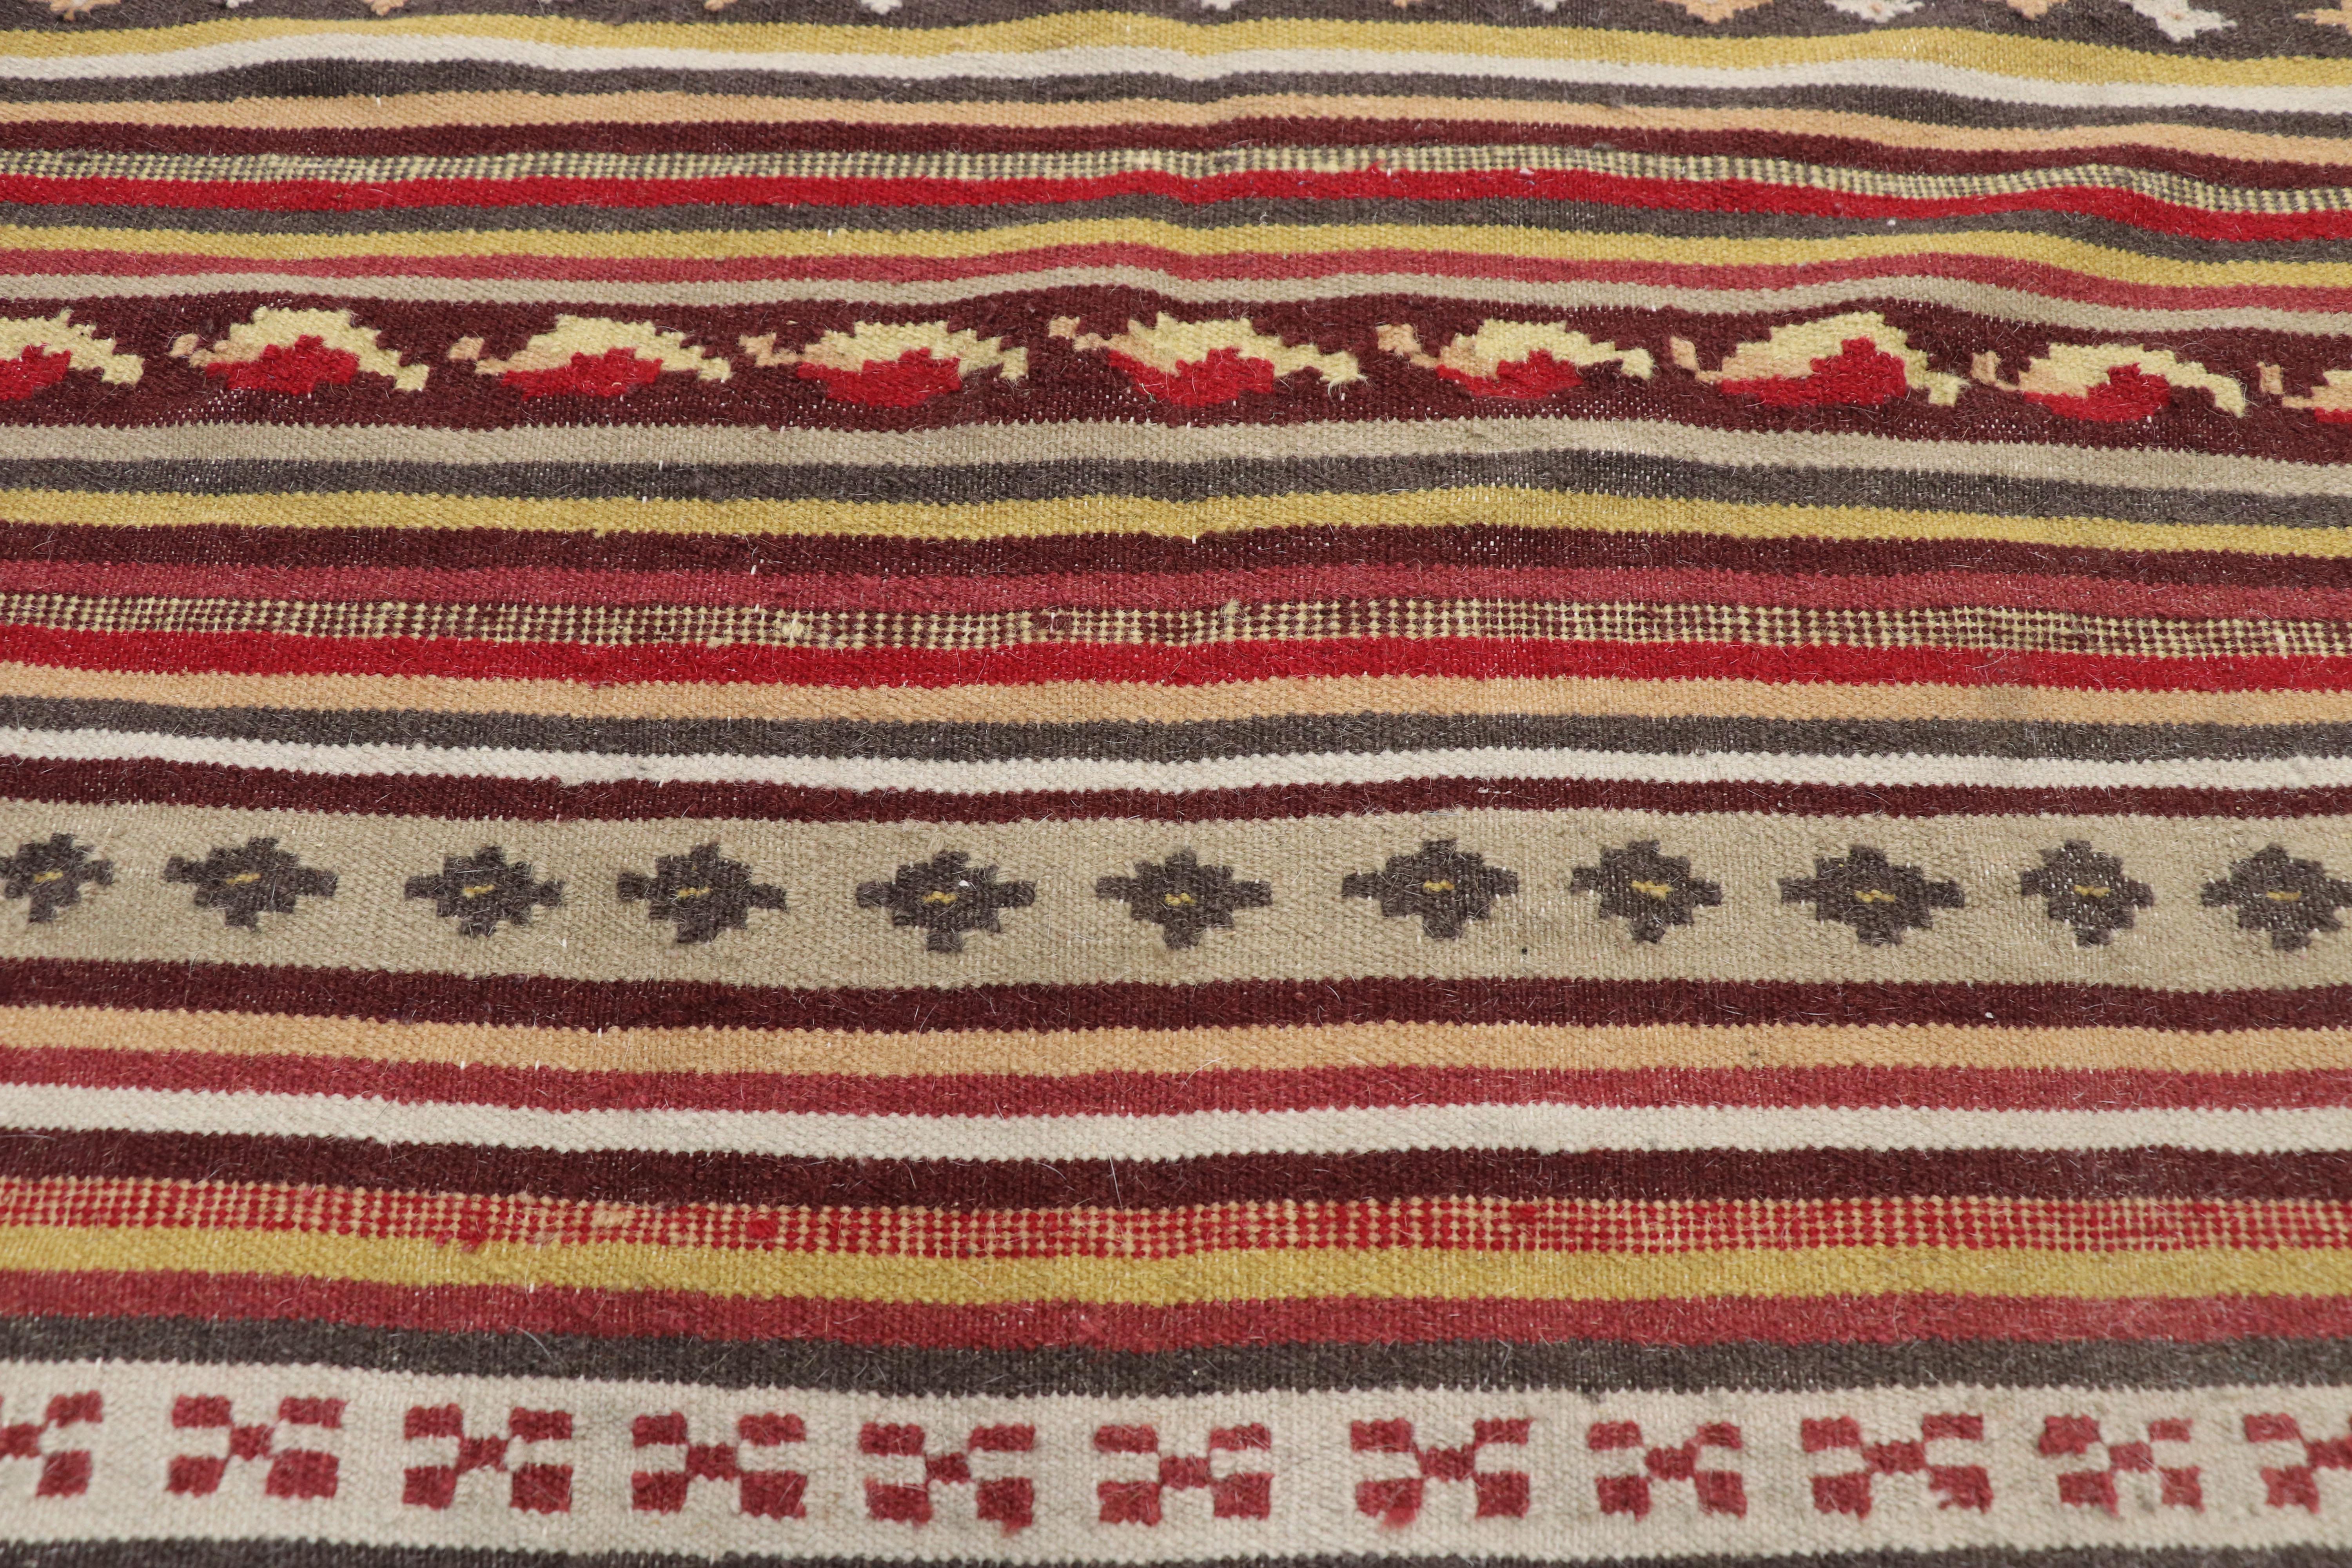 Vintage Turkish Striped Kilim Rug with Tribal Style, Flat-Weave Rug with Stripes For Sale 1